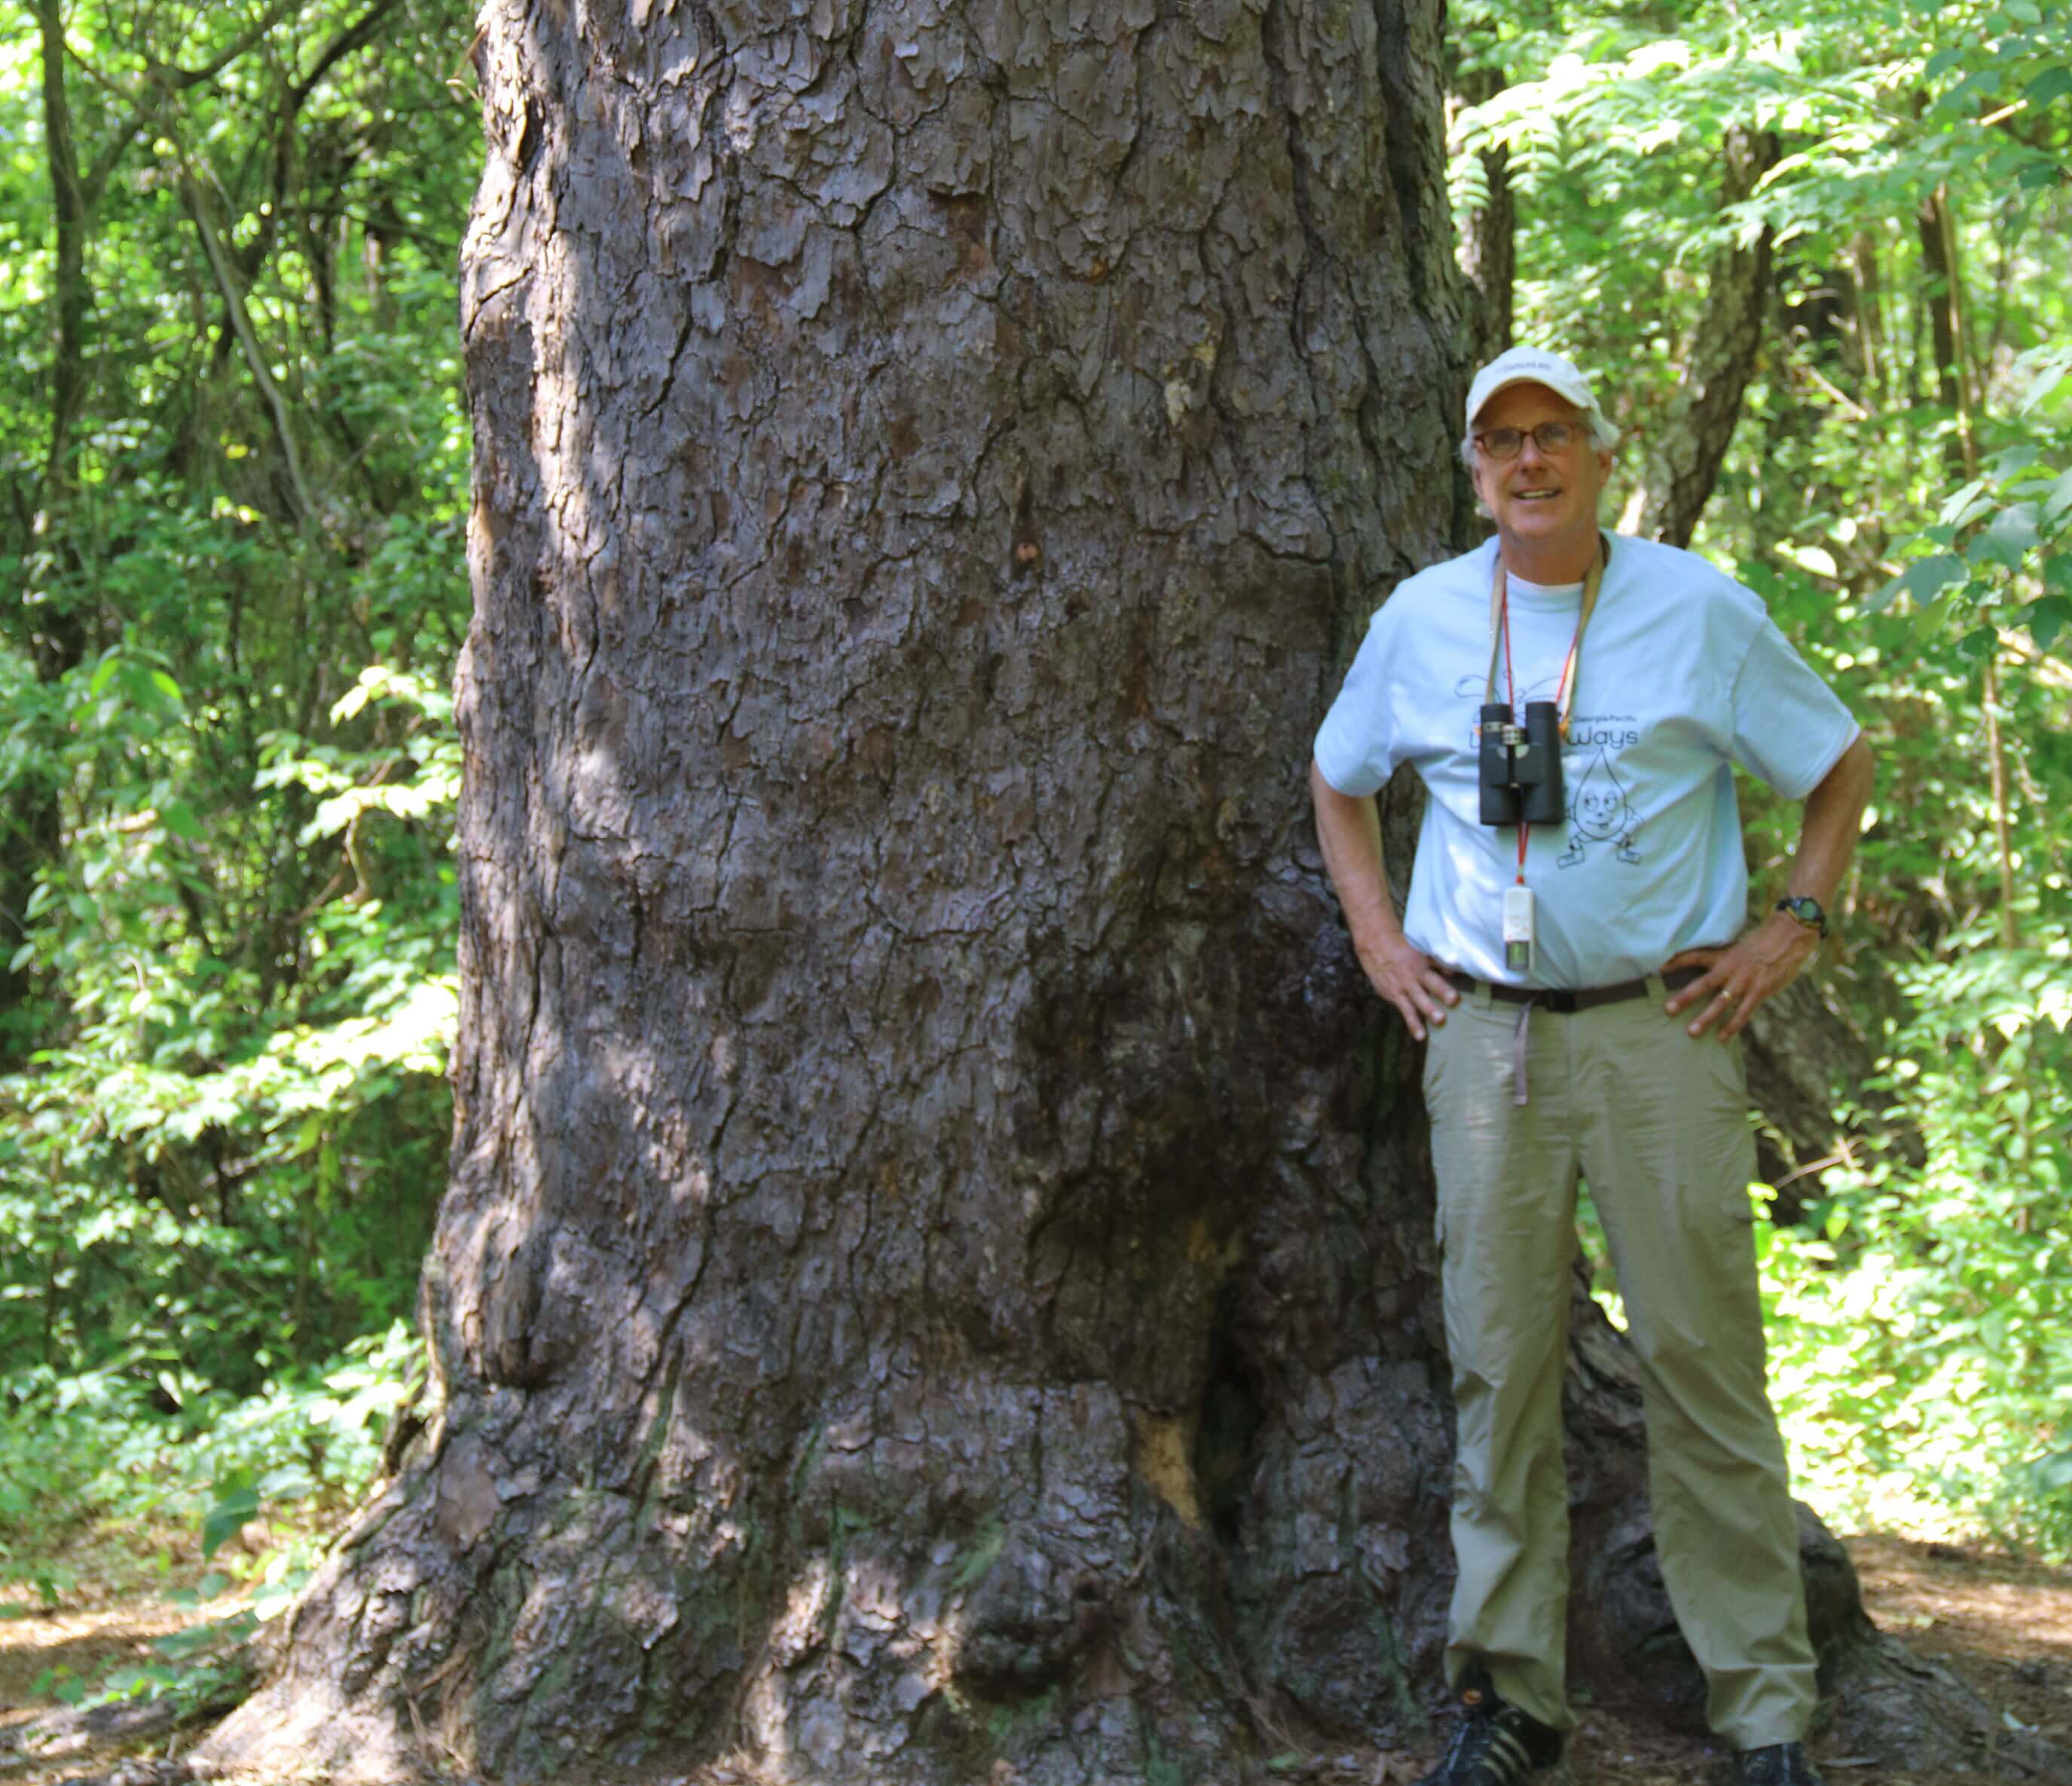 While touring the diverse forest ecosystems around Crossett, Ark., with wildlife biologist Bobby Maddrey and forester Don Sisson, both of Georgia-Pacific, we saw a giant loblolly pine. Photo by Bruce Beehler.